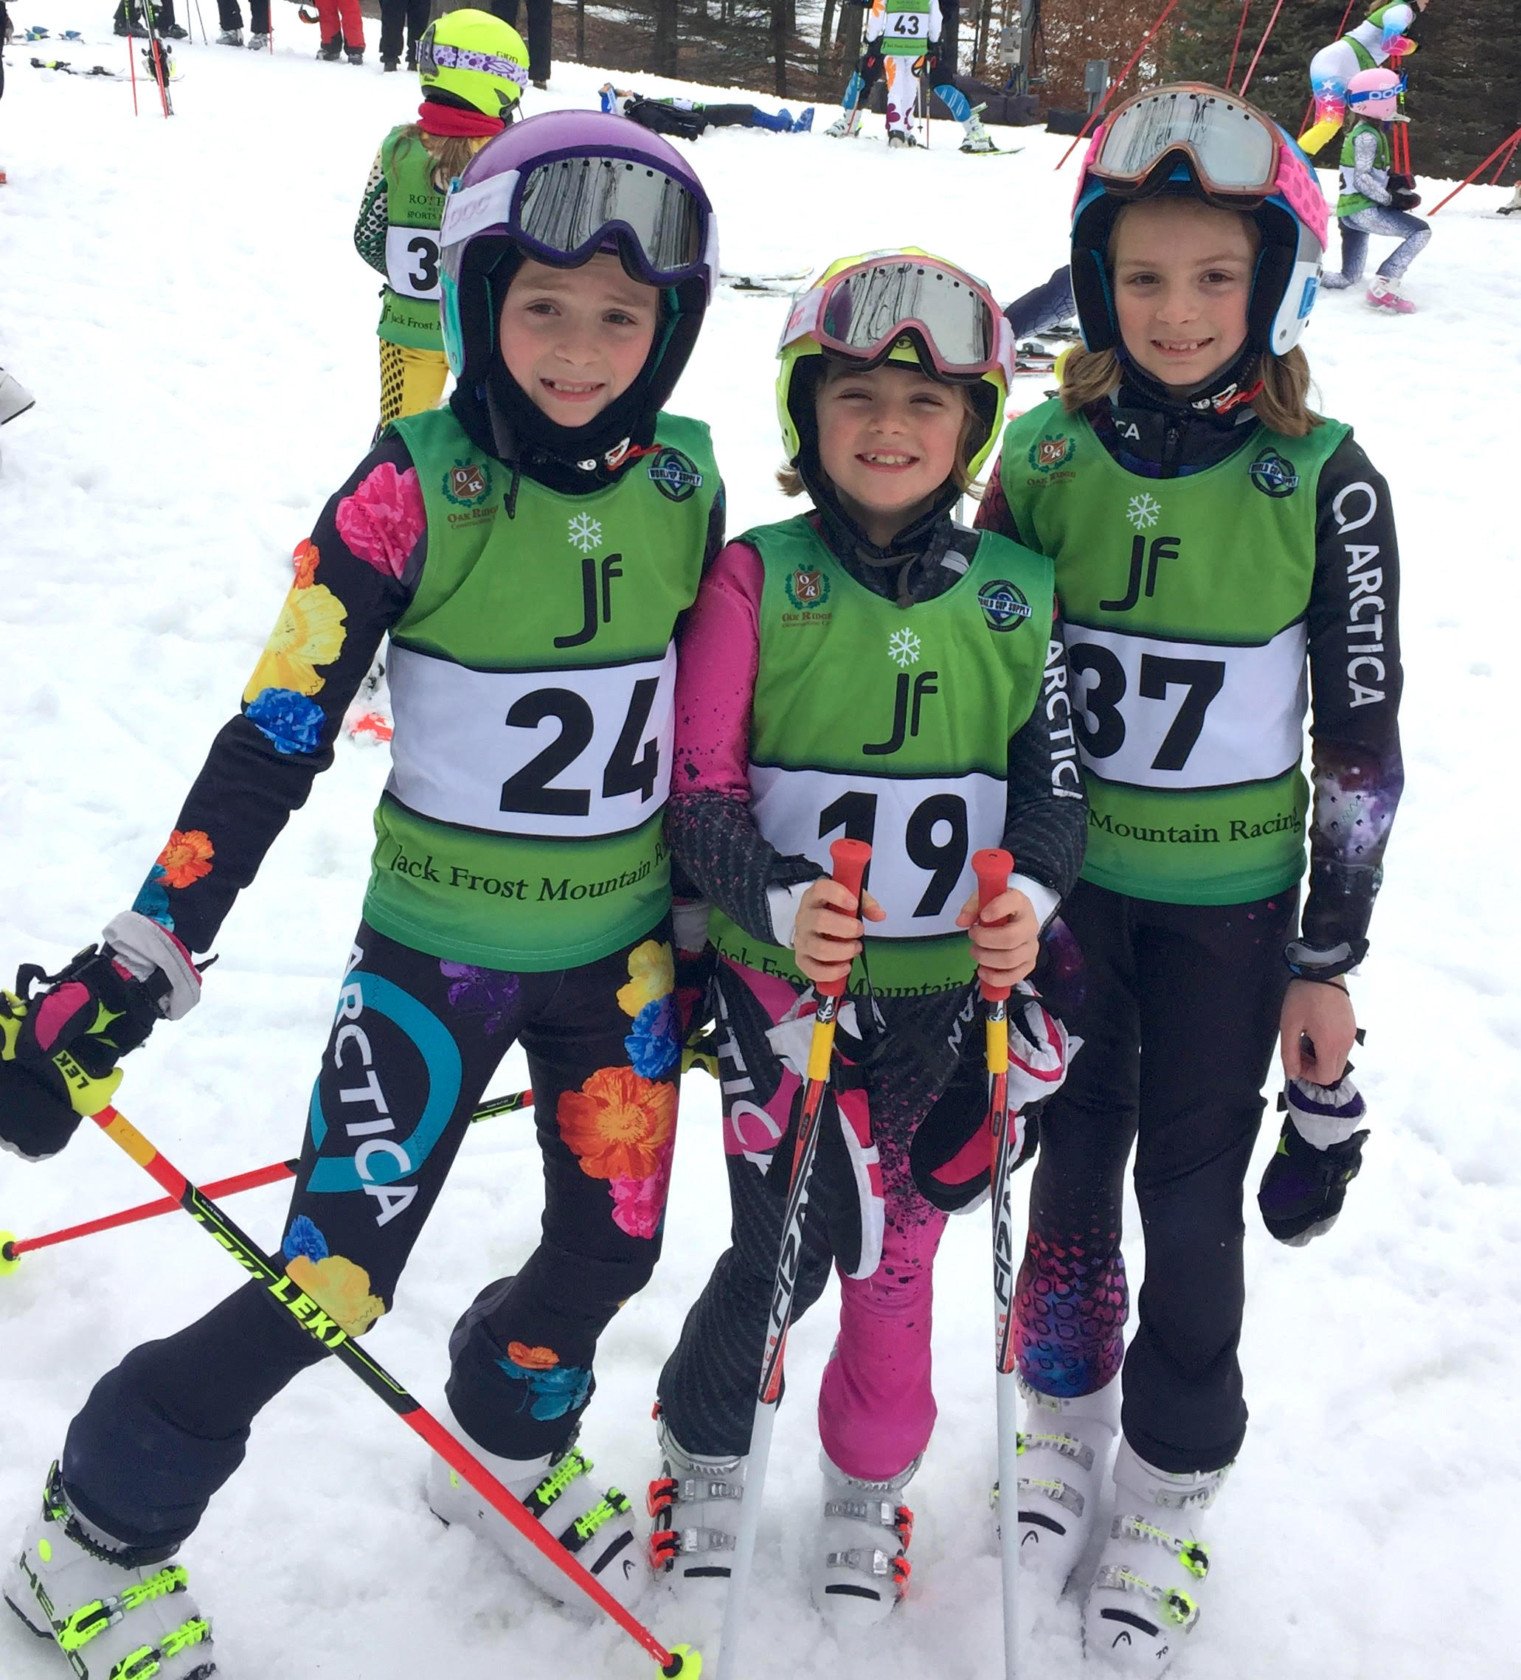 No matter what they age, they love the Arctica ski racing suits for girls.